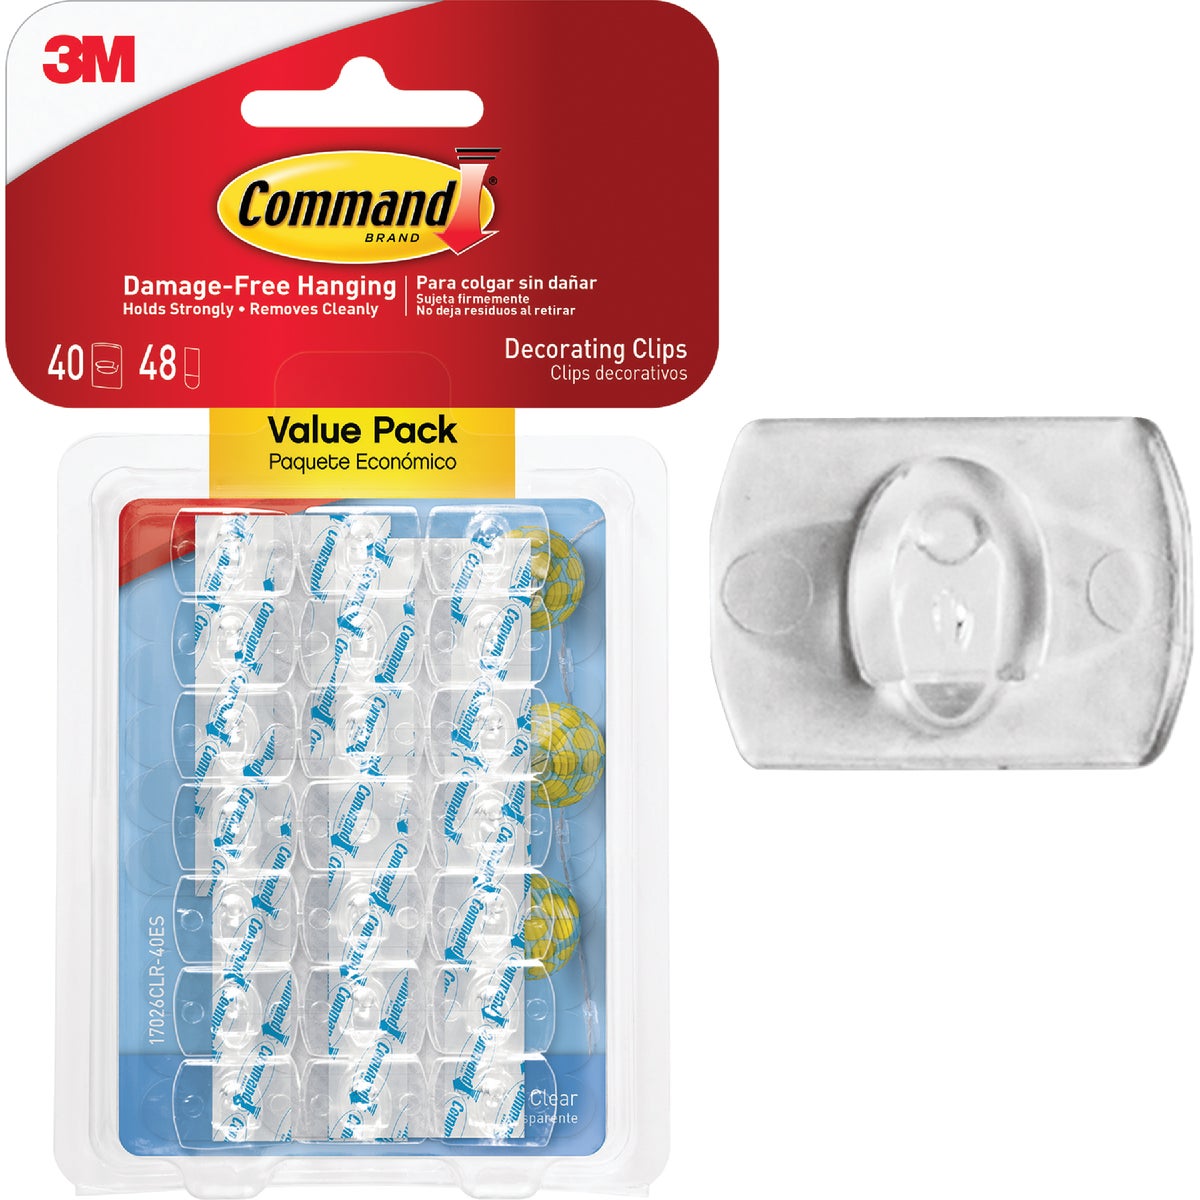 Command Decor Adhesive Clips (40-Count)